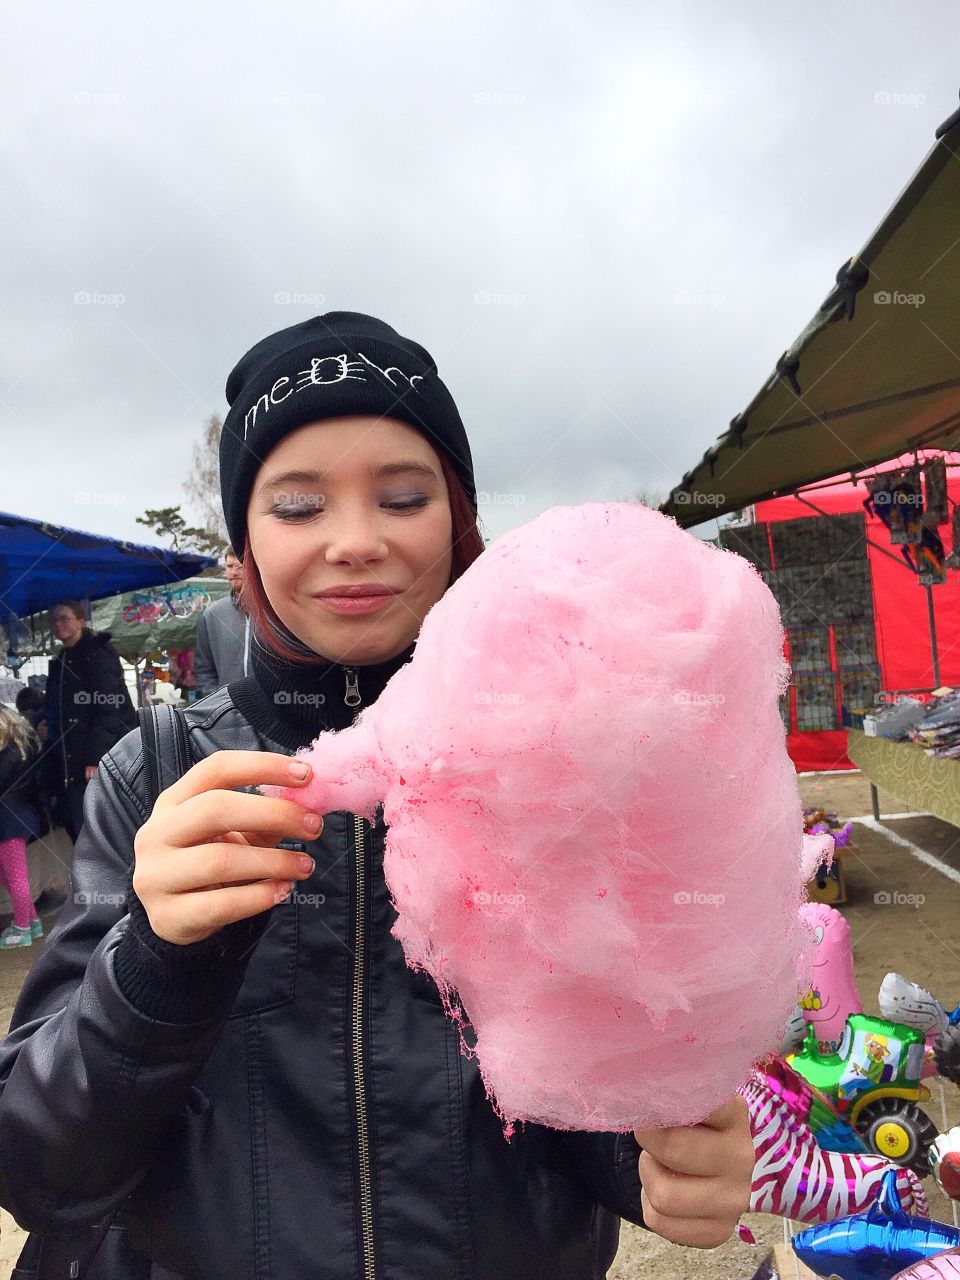 Girl with pink candy-floss